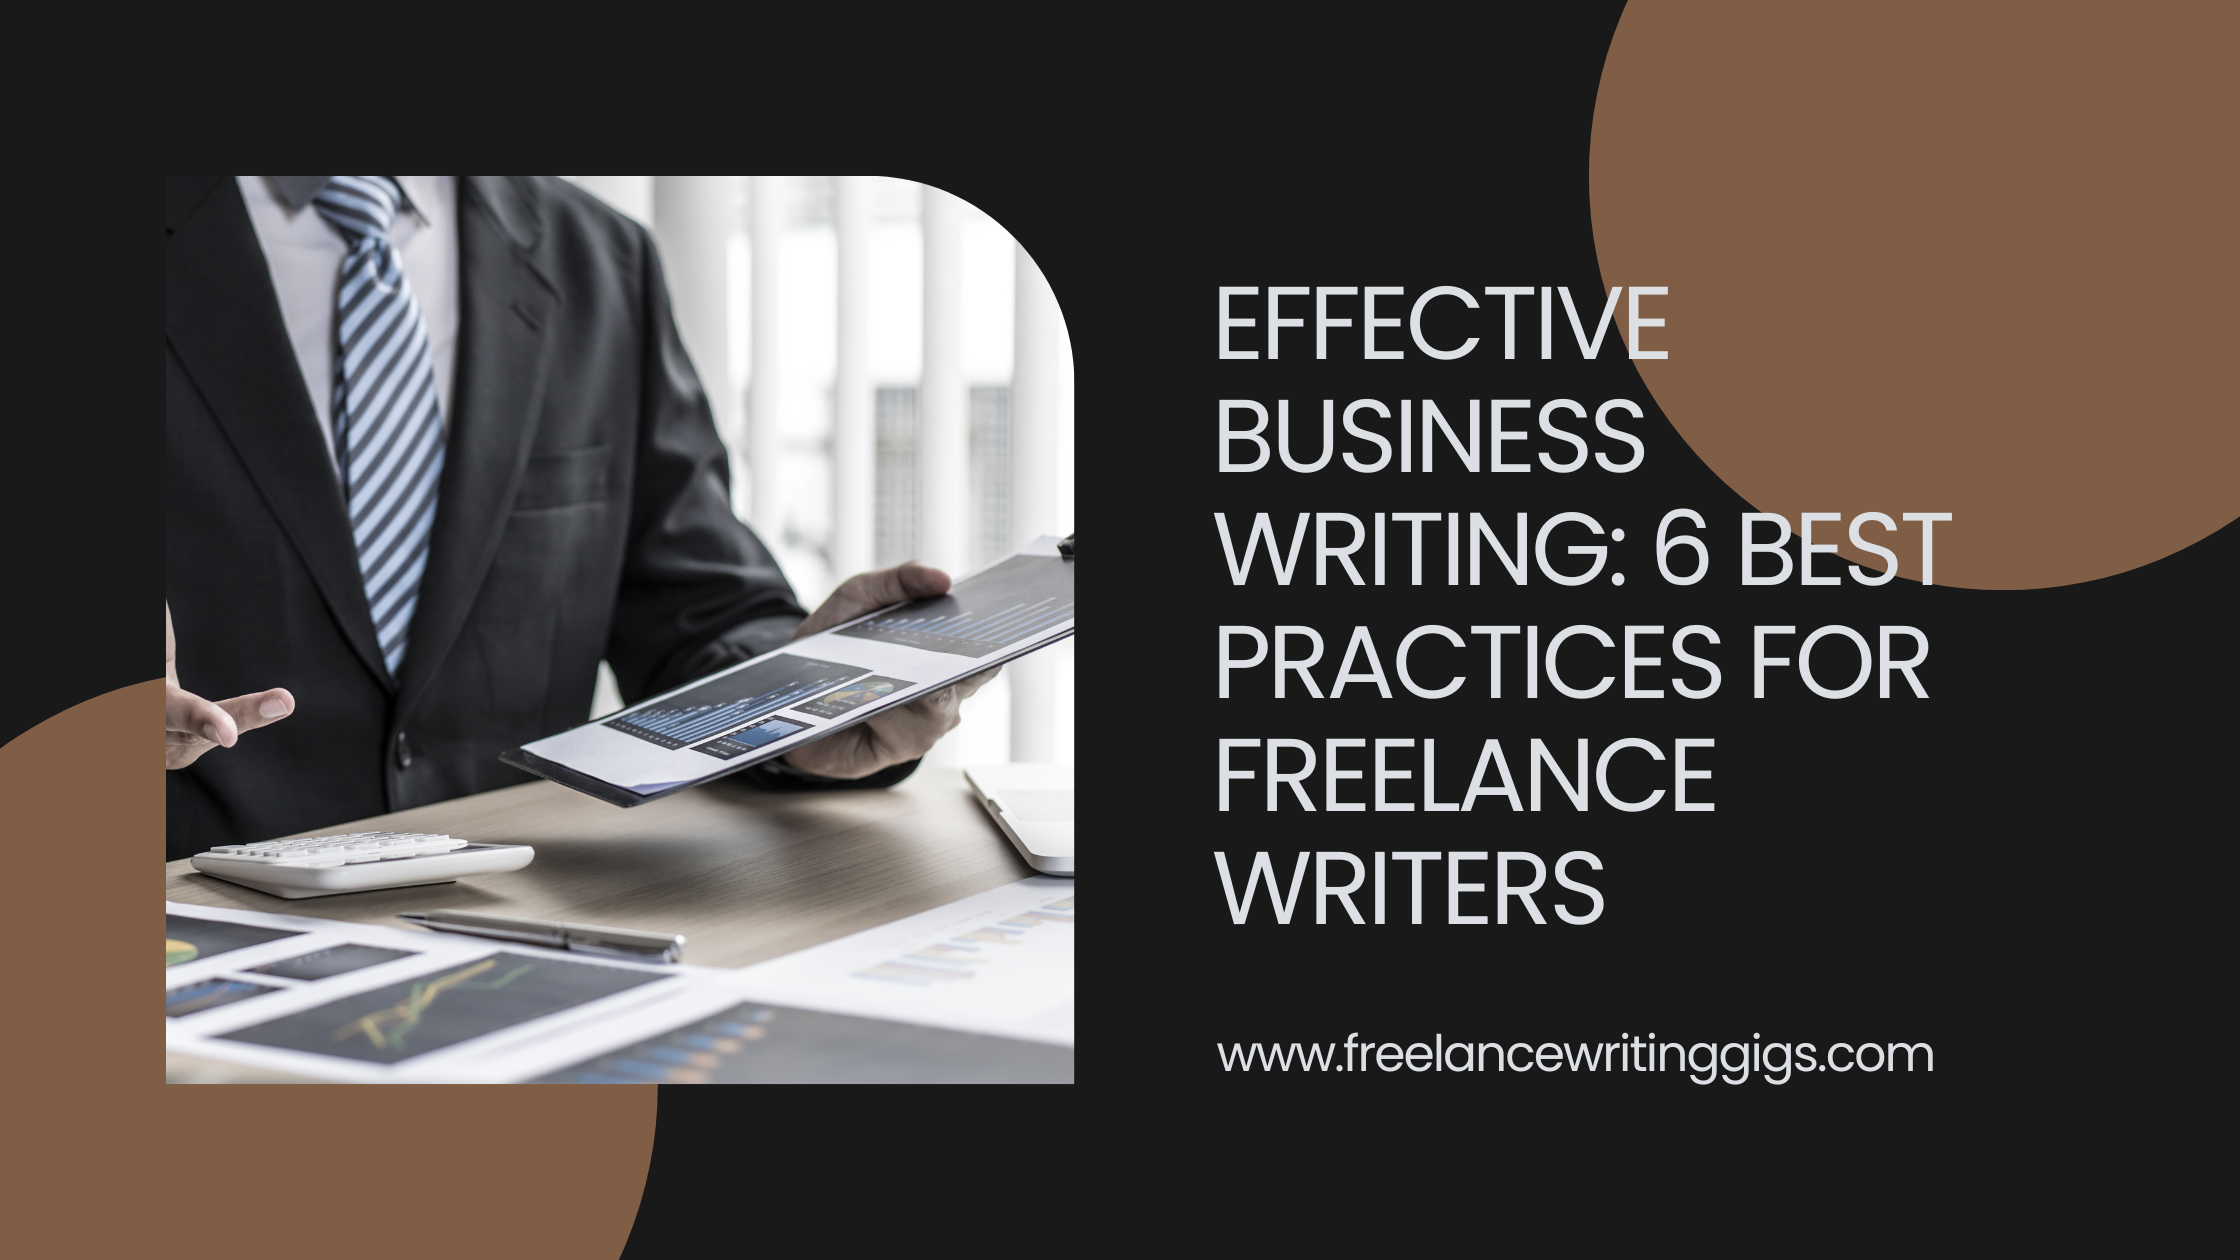 Effective Business Writing: 6 Best Practices for Freelance Writers